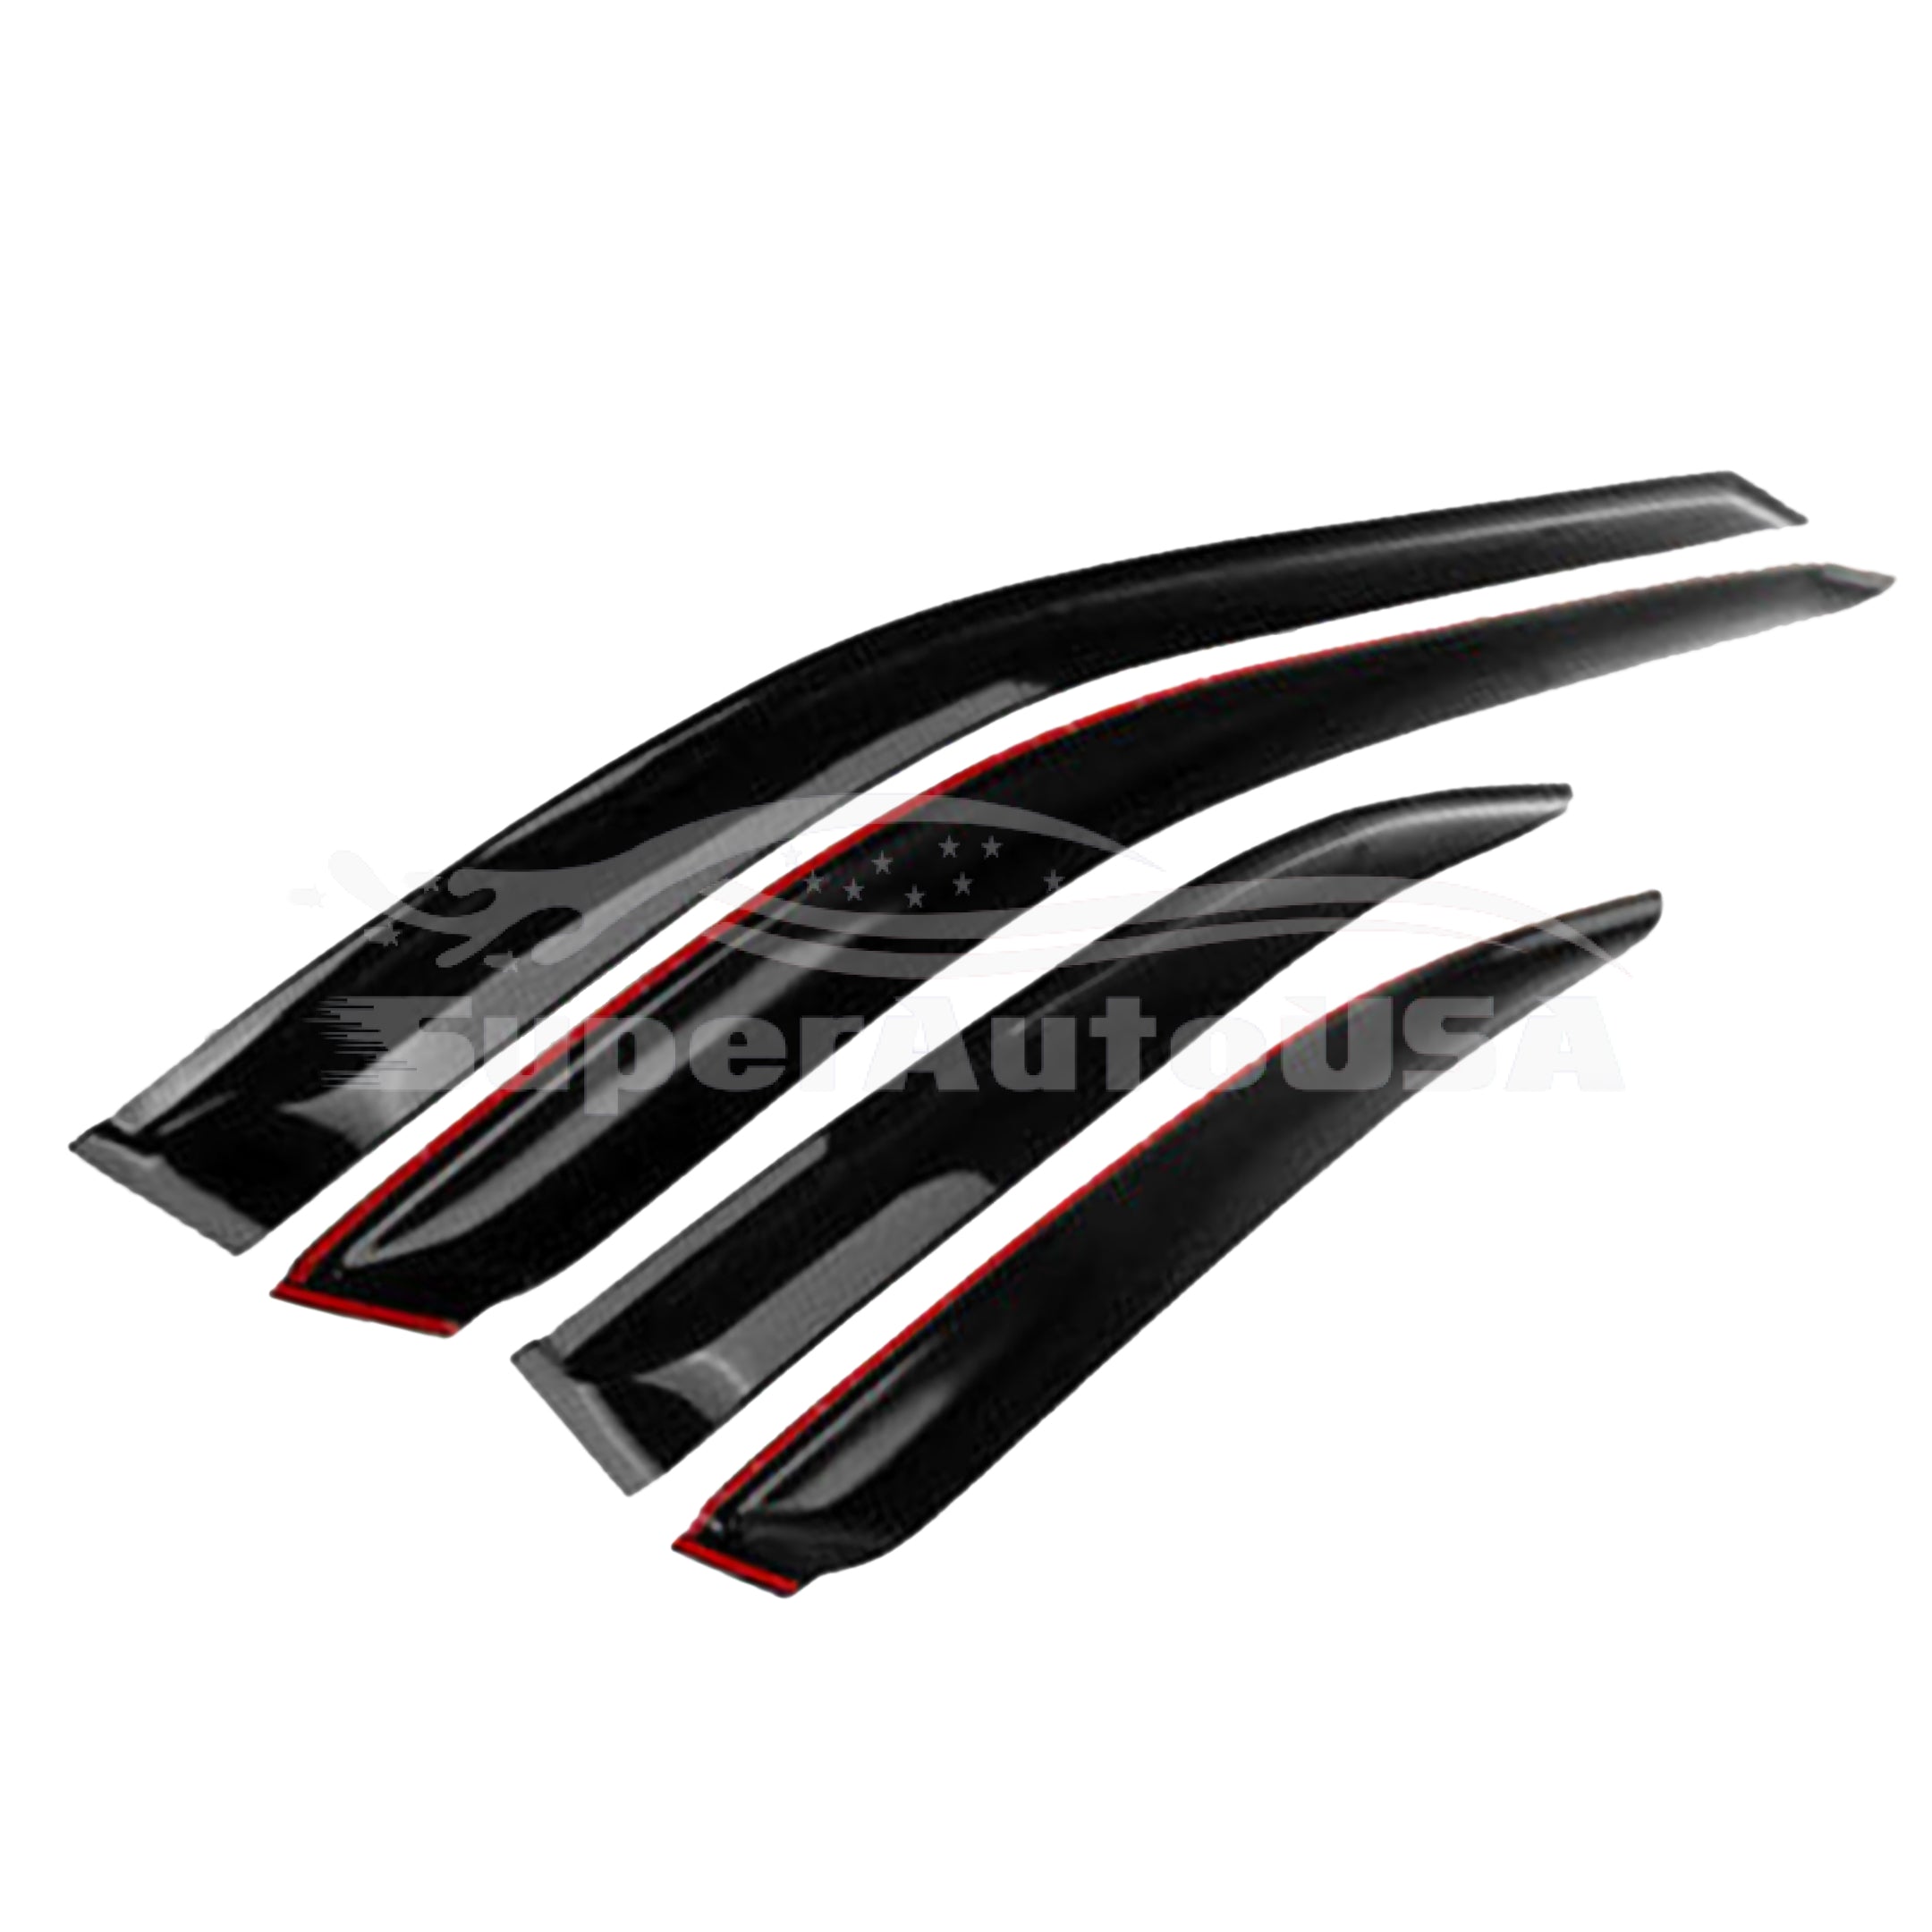 For Sorento 2015-2020 Out-Channel Vent Window Visors Rain Sun Wind Guards Shade Deflectors